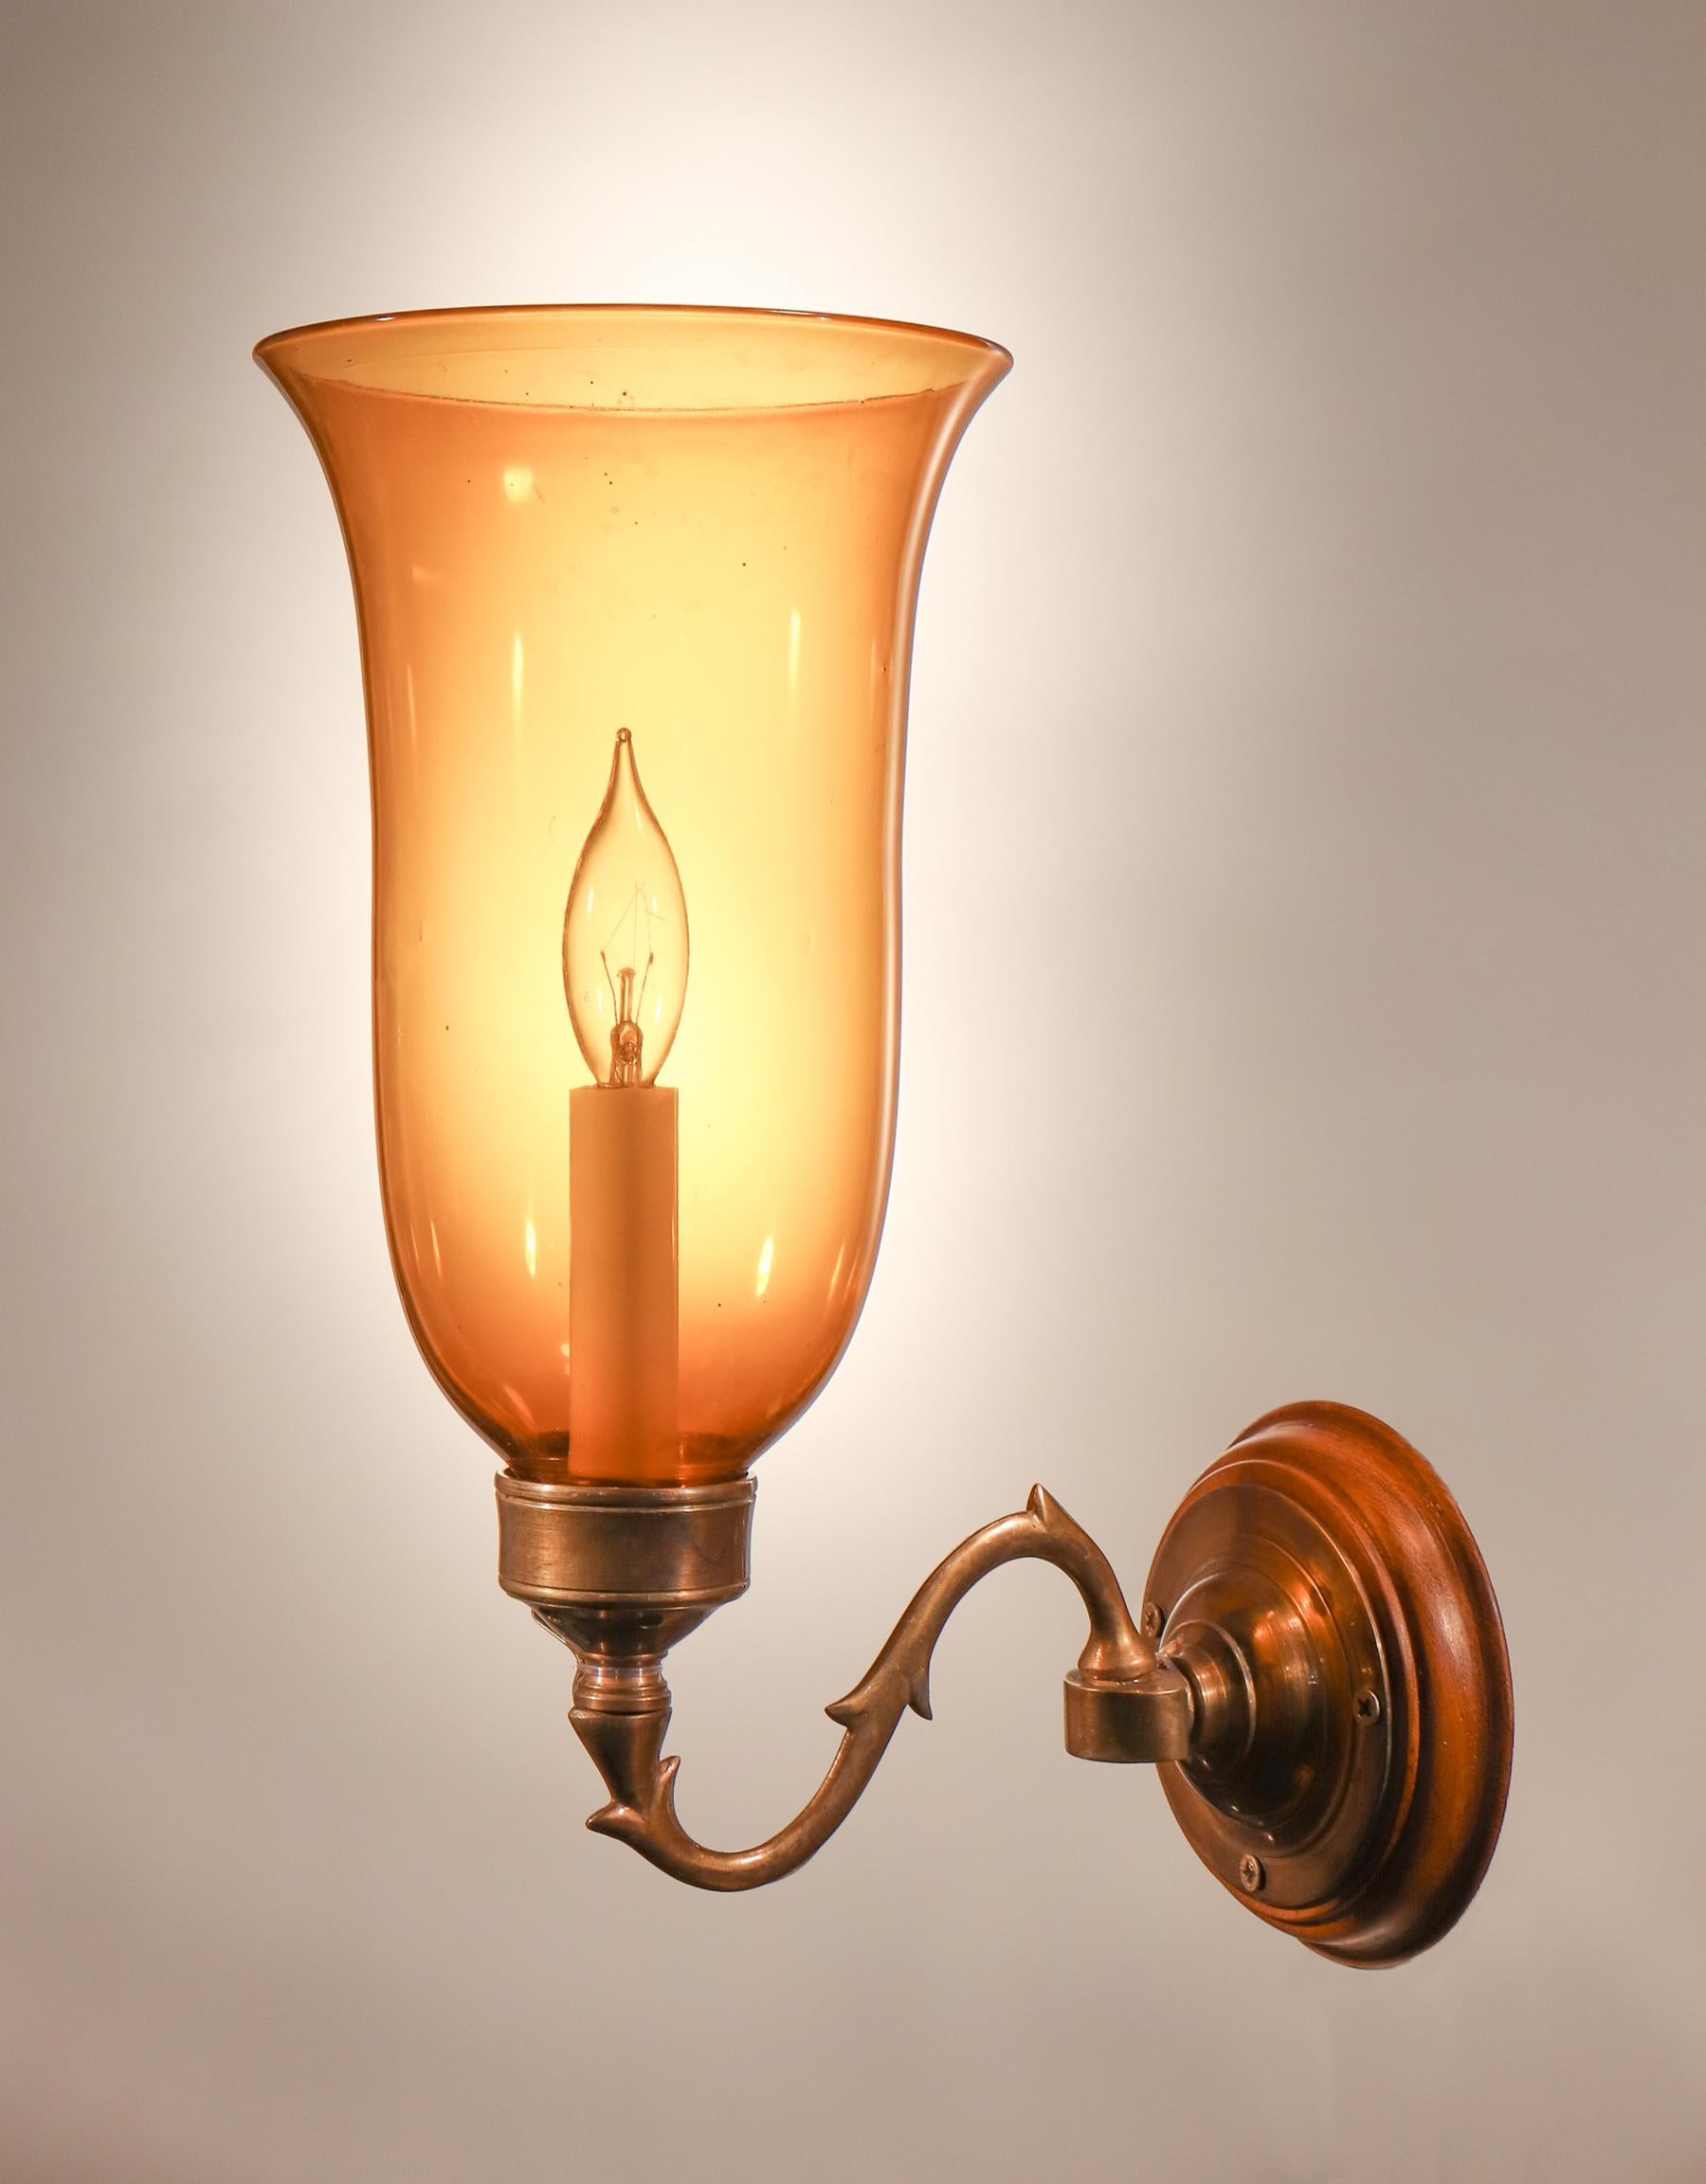 English Antique Hurricane Shade Wall Sconces with Amber Colored Glass